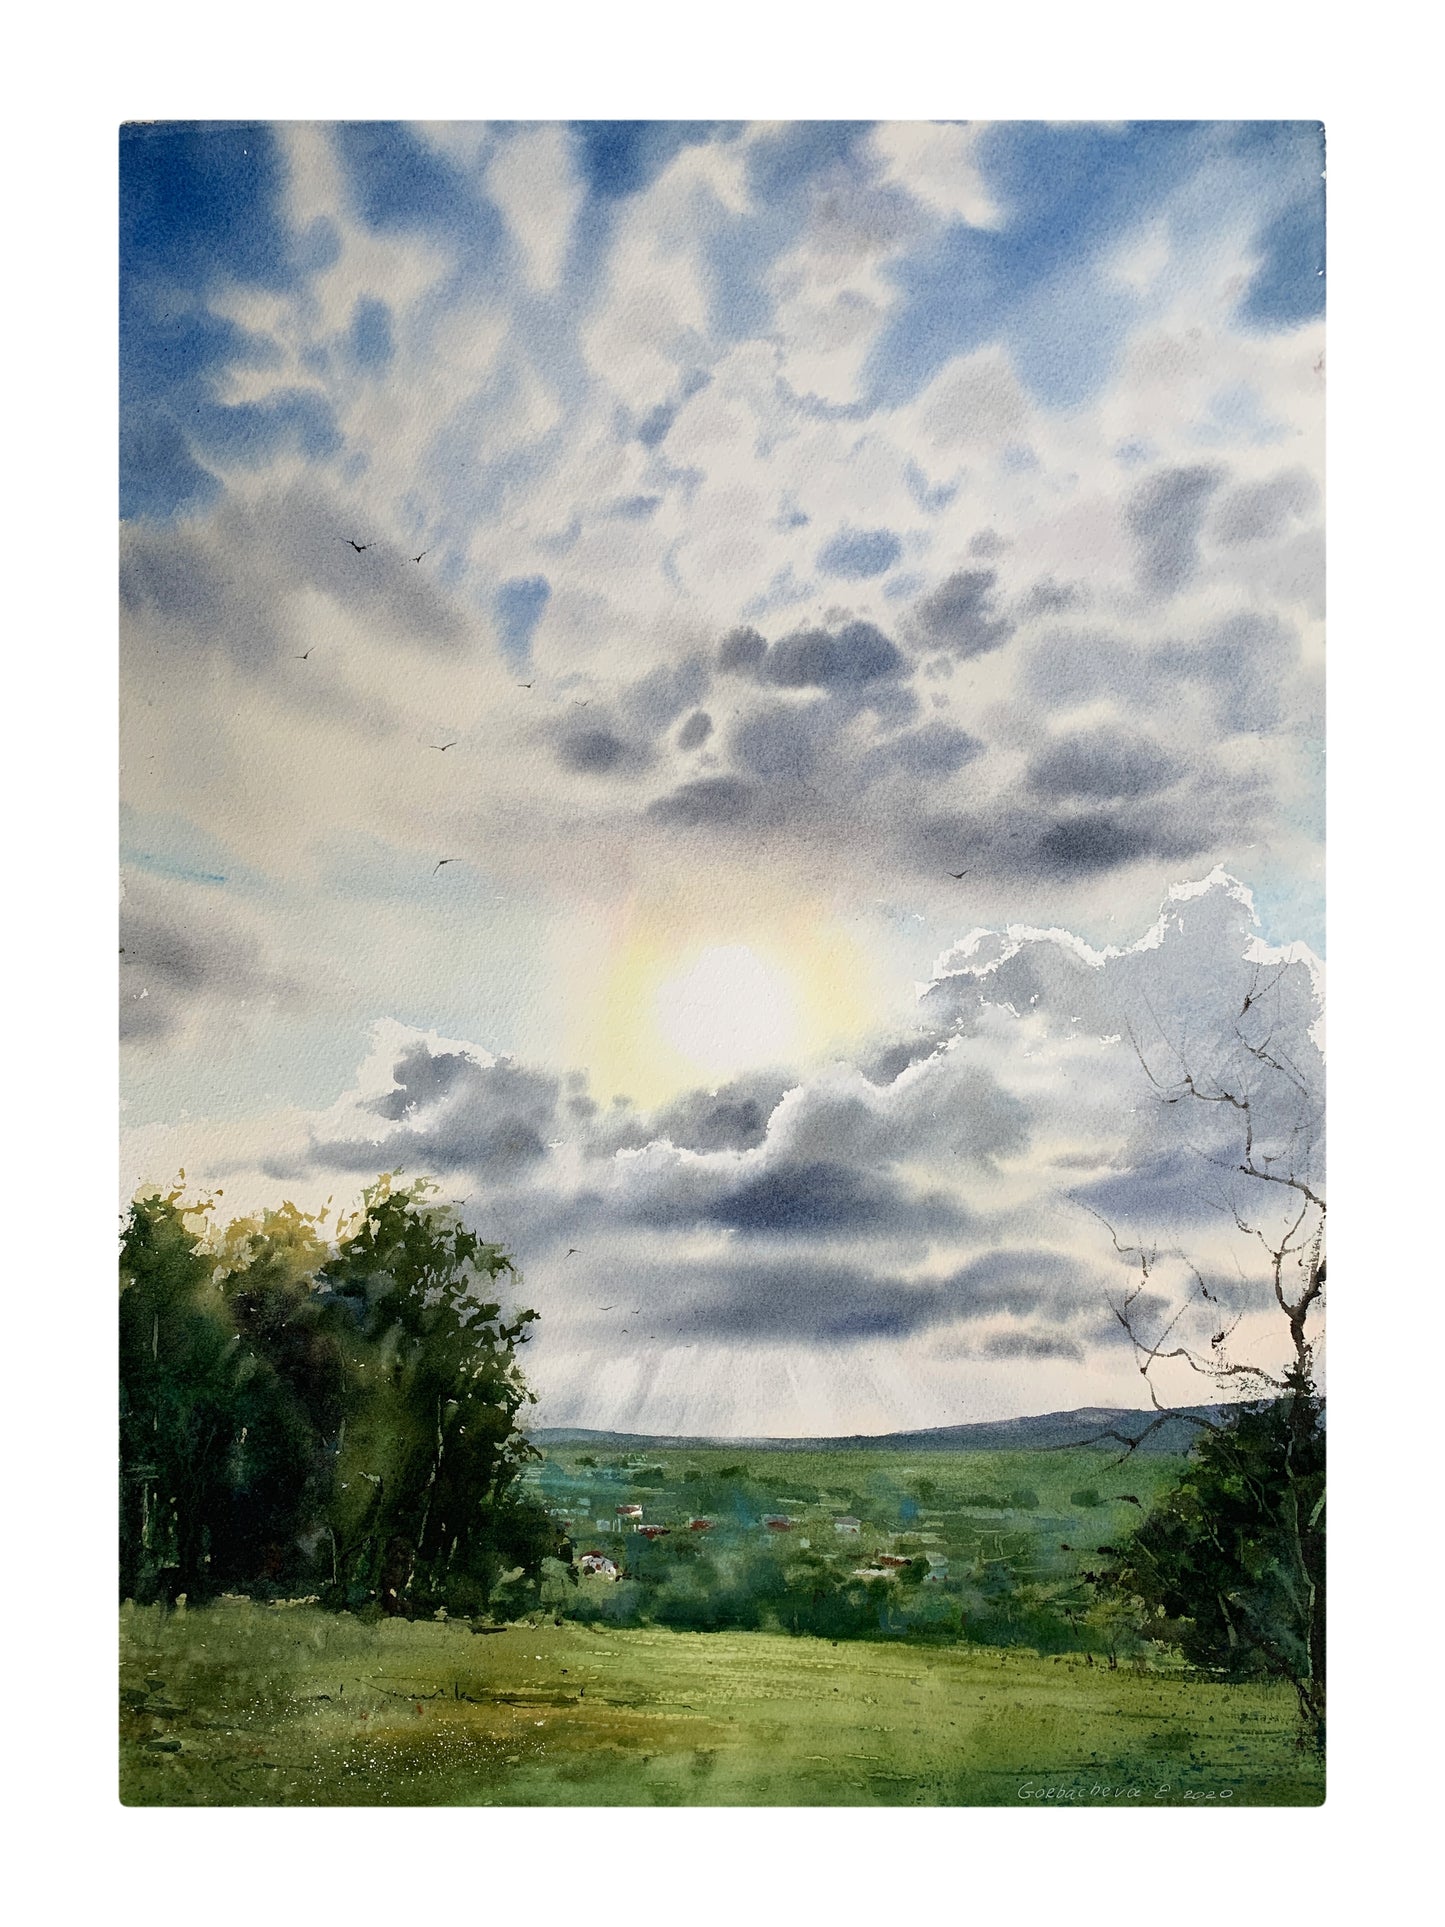 Rural Landscape Painting - Field and Clouds #2 - 15x22 in